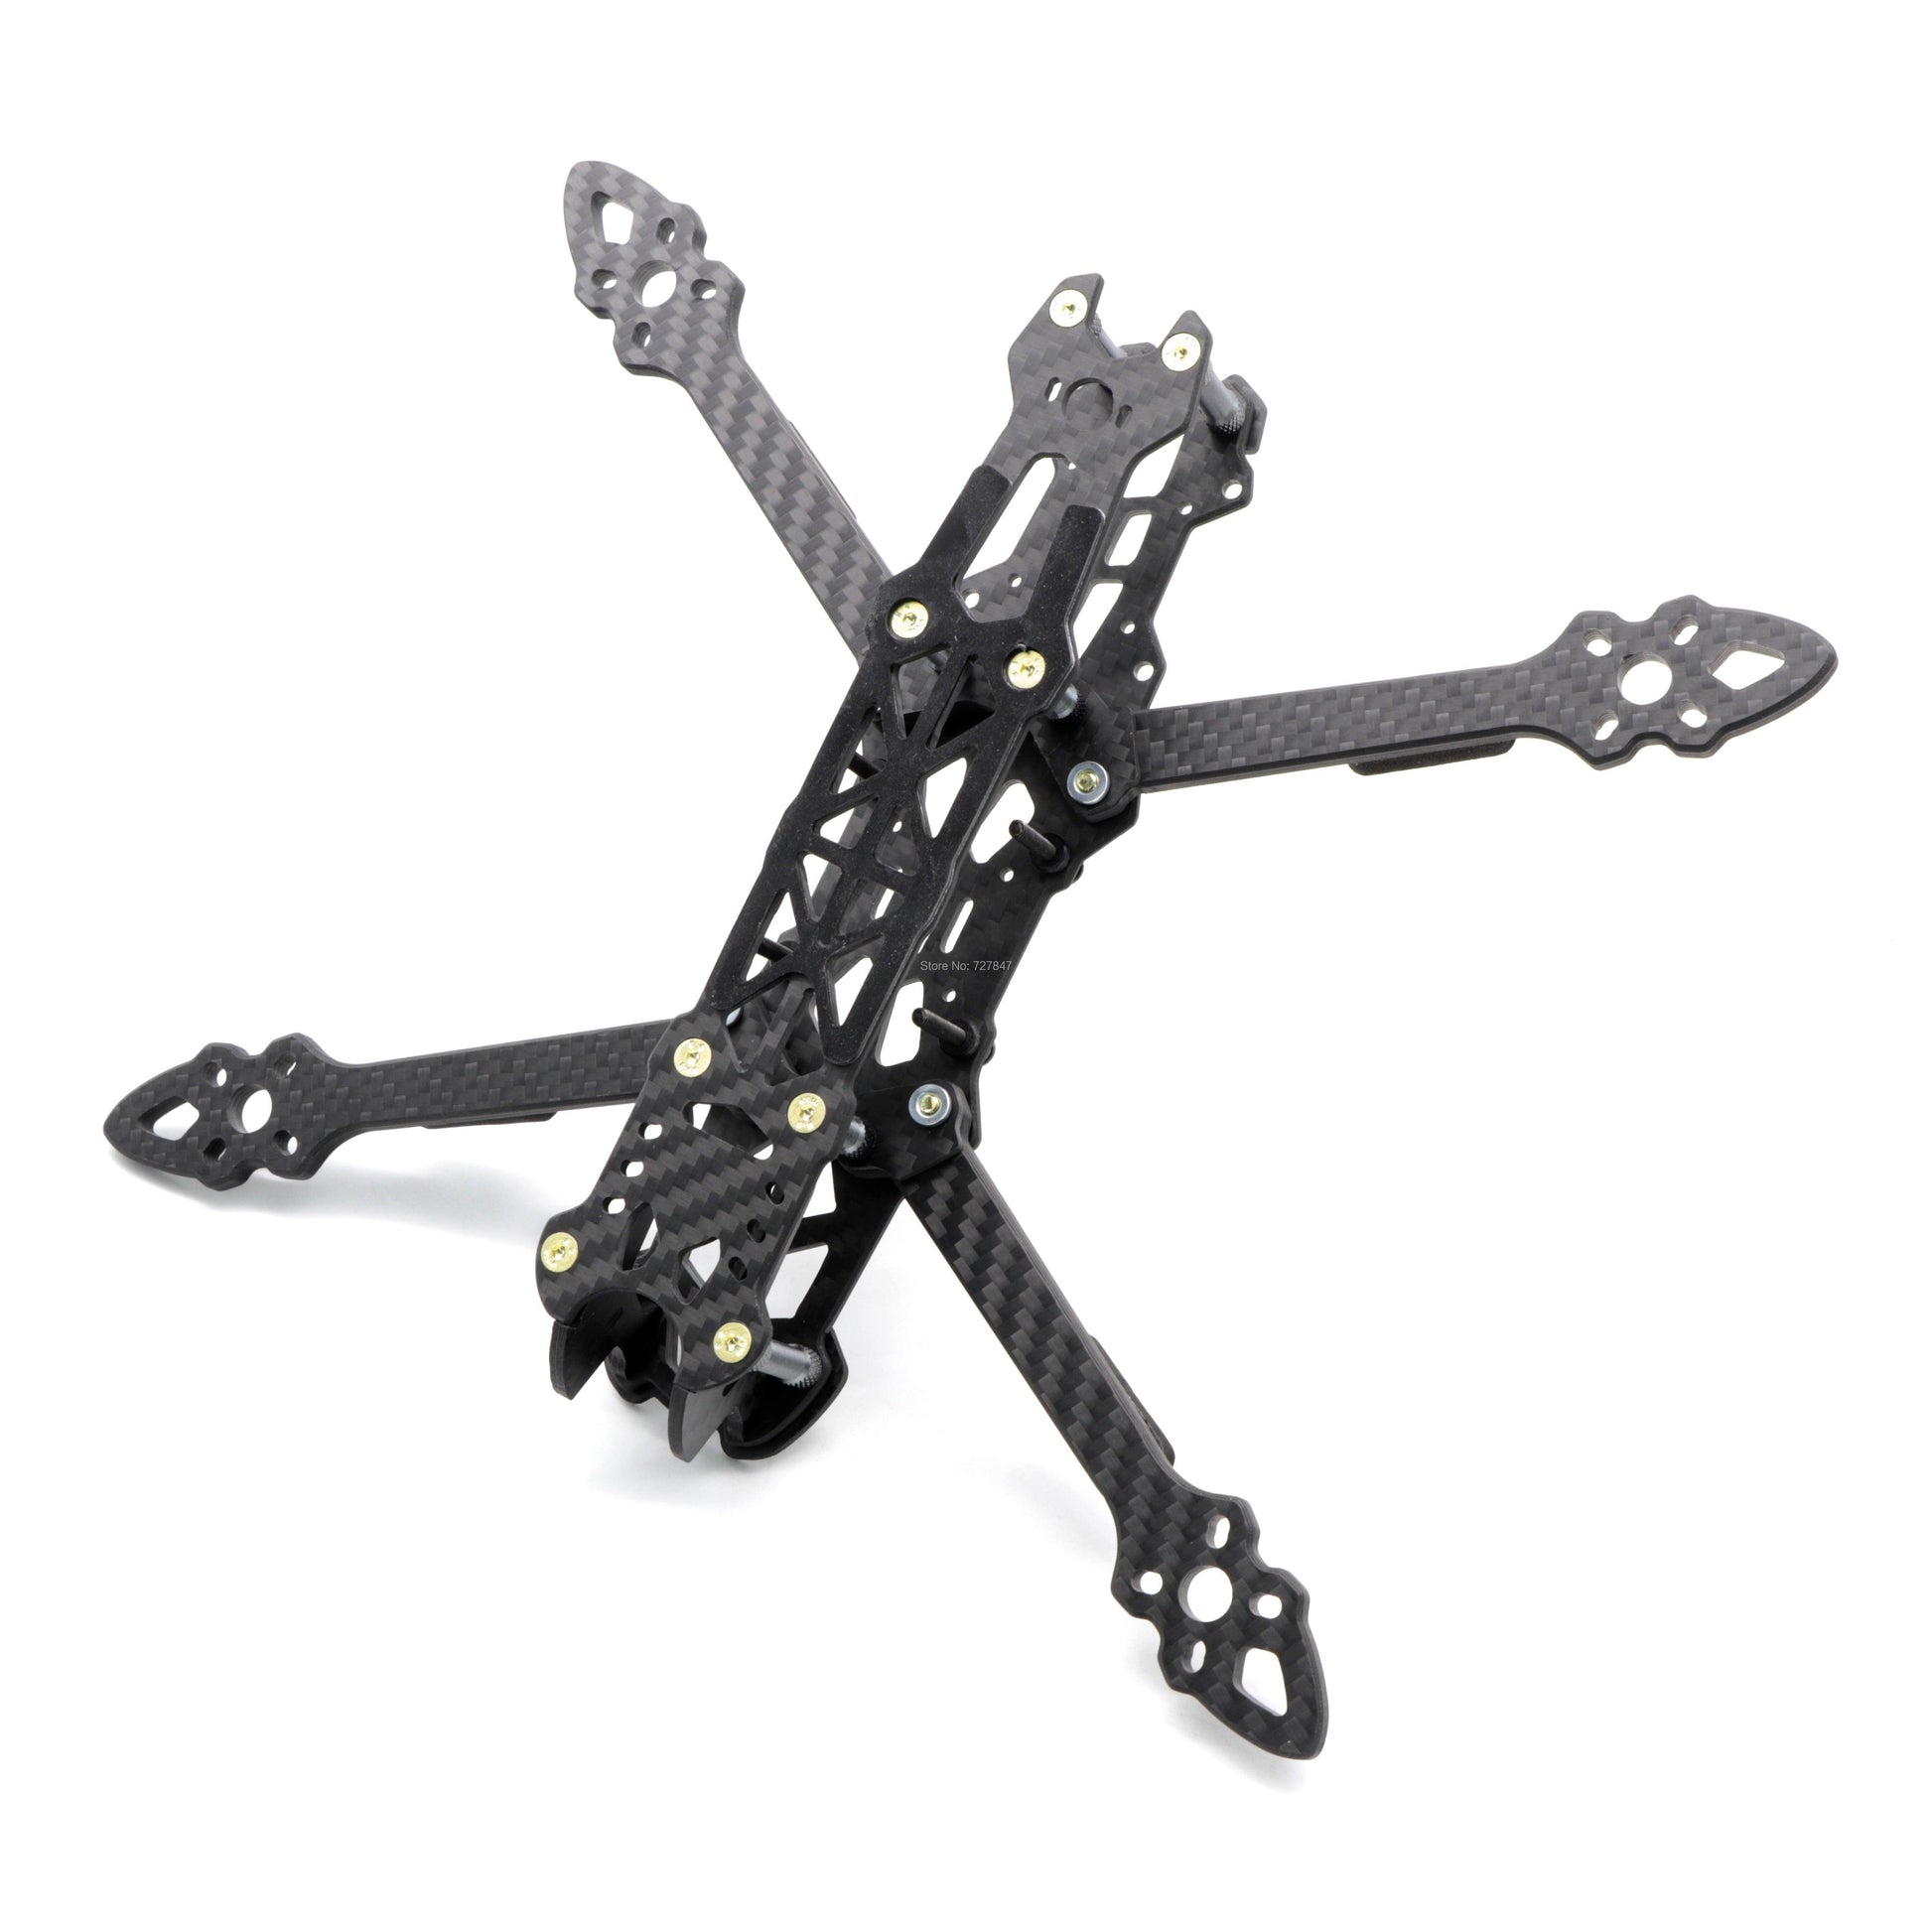 Mark4 5inch FPV Frame Kit - 225mm/ 6inch 260mm / 7inch 295mm W/ 5mm Arm FPV Racing Drone Quadcopter Freestyle Frame For Rooster 230mm - RCDrone